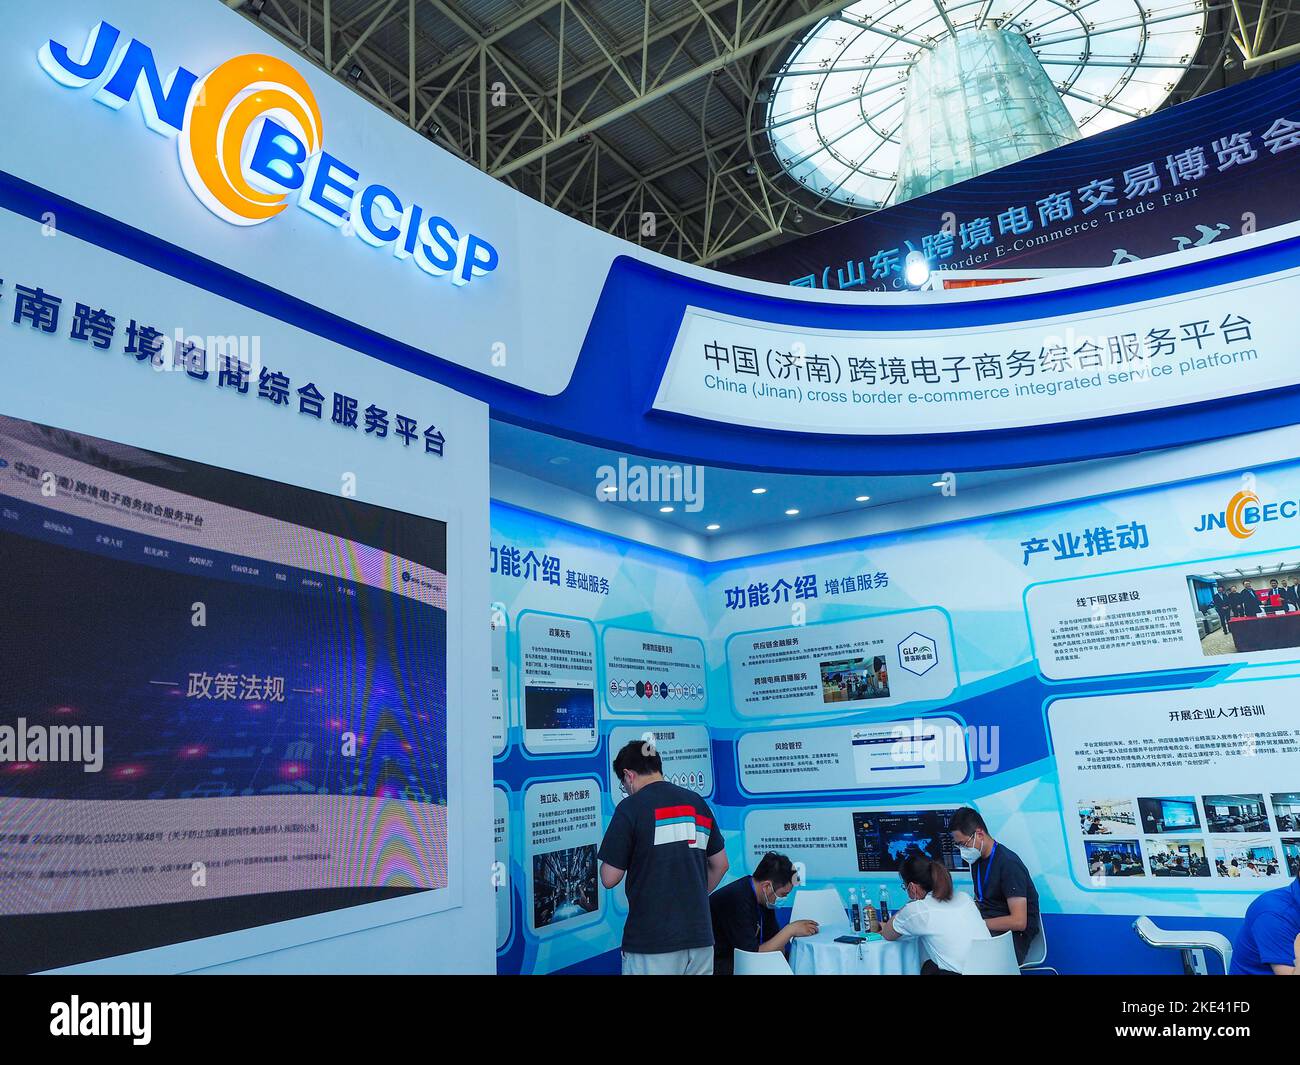 2Cshop Cross-border Independent Station belongs to Shenzhen Haifeng blowing  Information Technology Co.